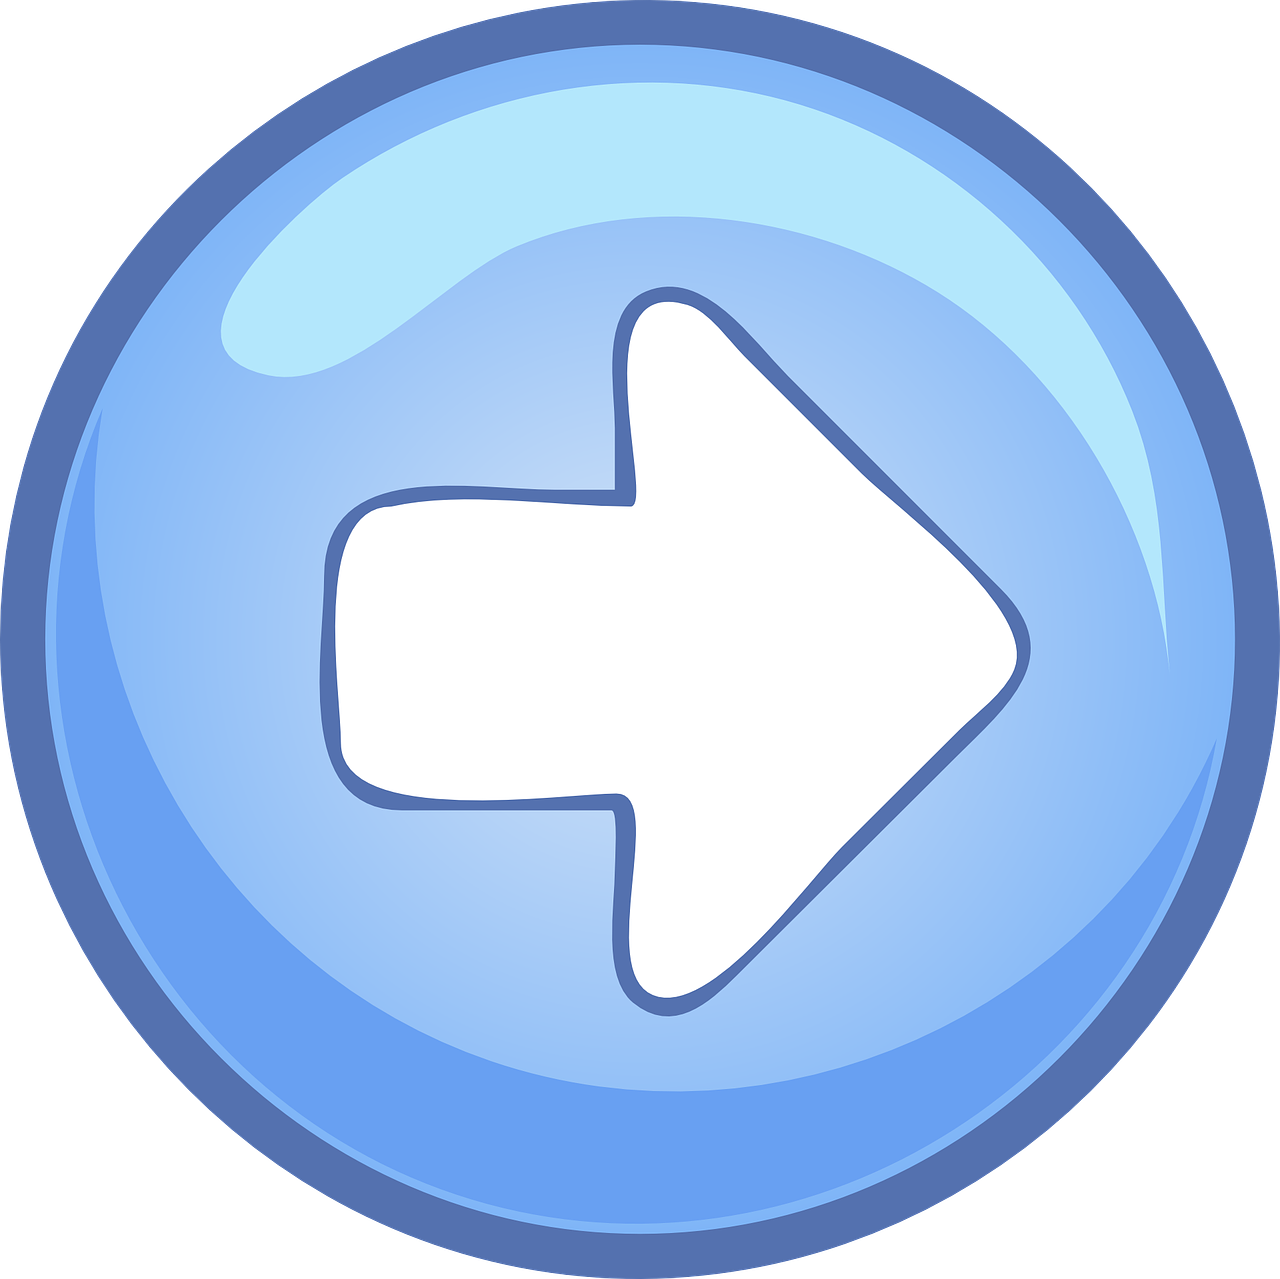 a blue button with a white arrow pointing to the right, by John Button, computer art, no gradients, path traced, round about to start, vista